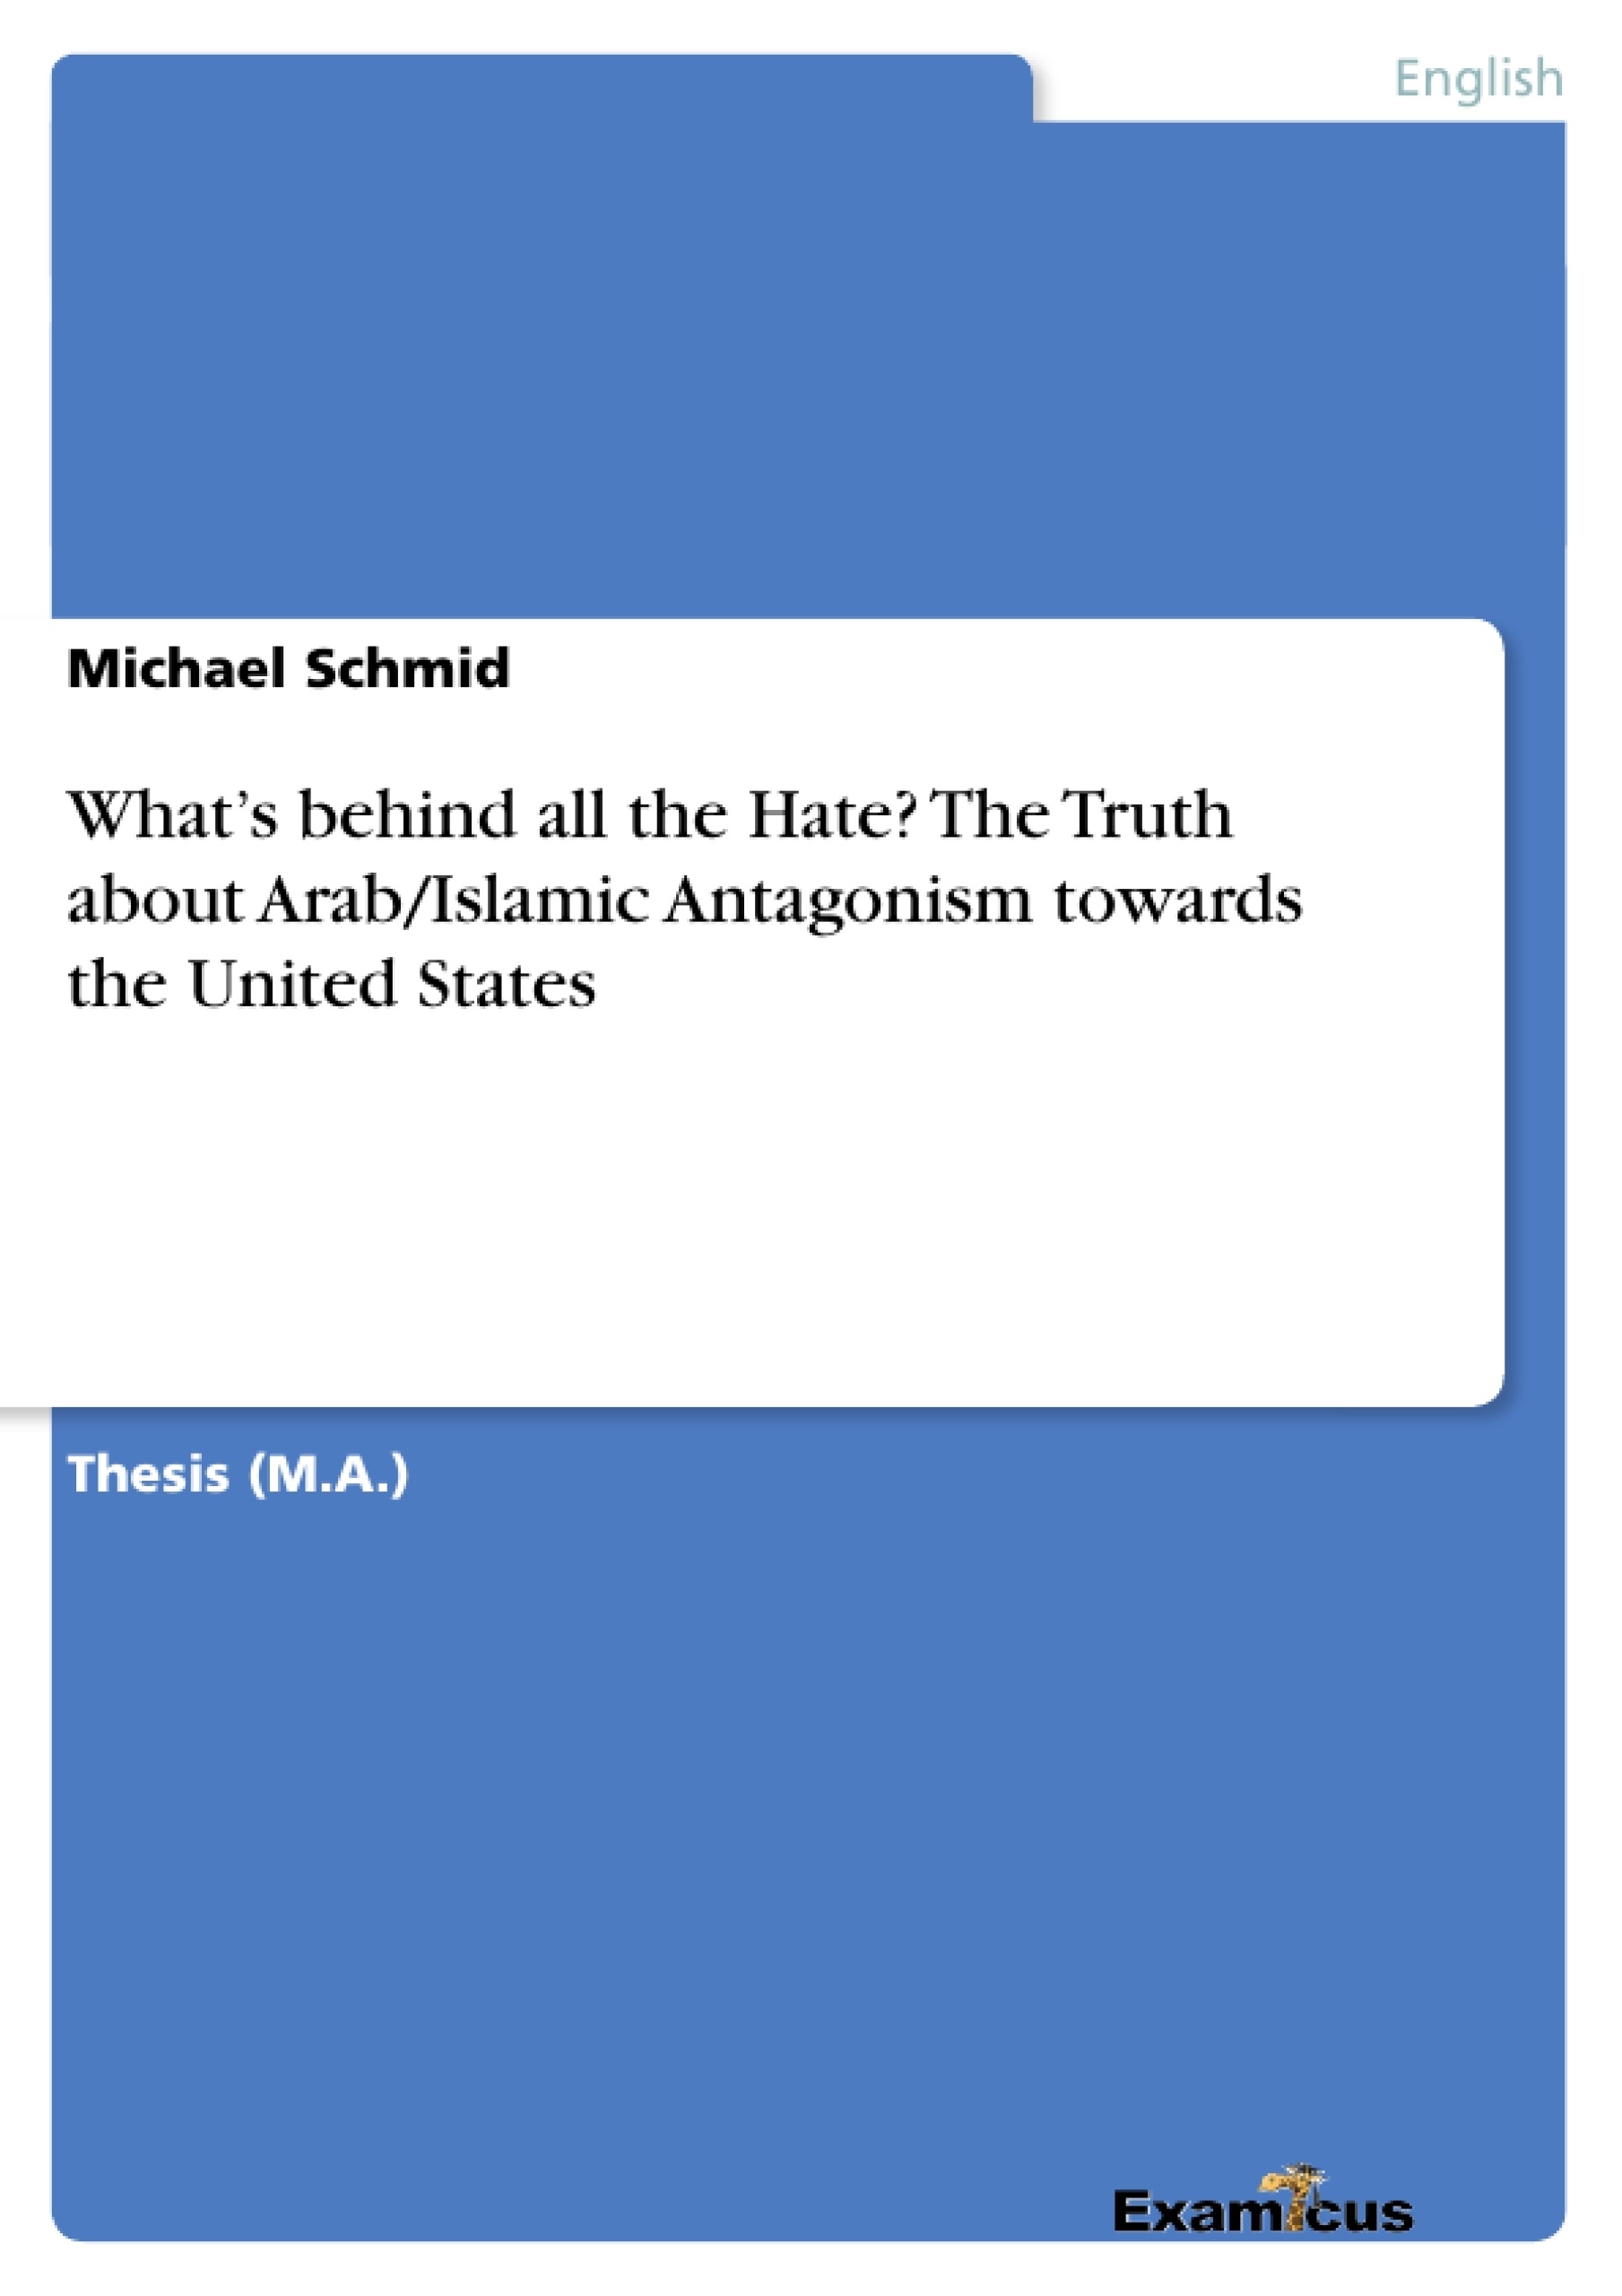 Titre: What’s behind all the Hate? The Truth about Arab/Islamic Antagonism towards the United States